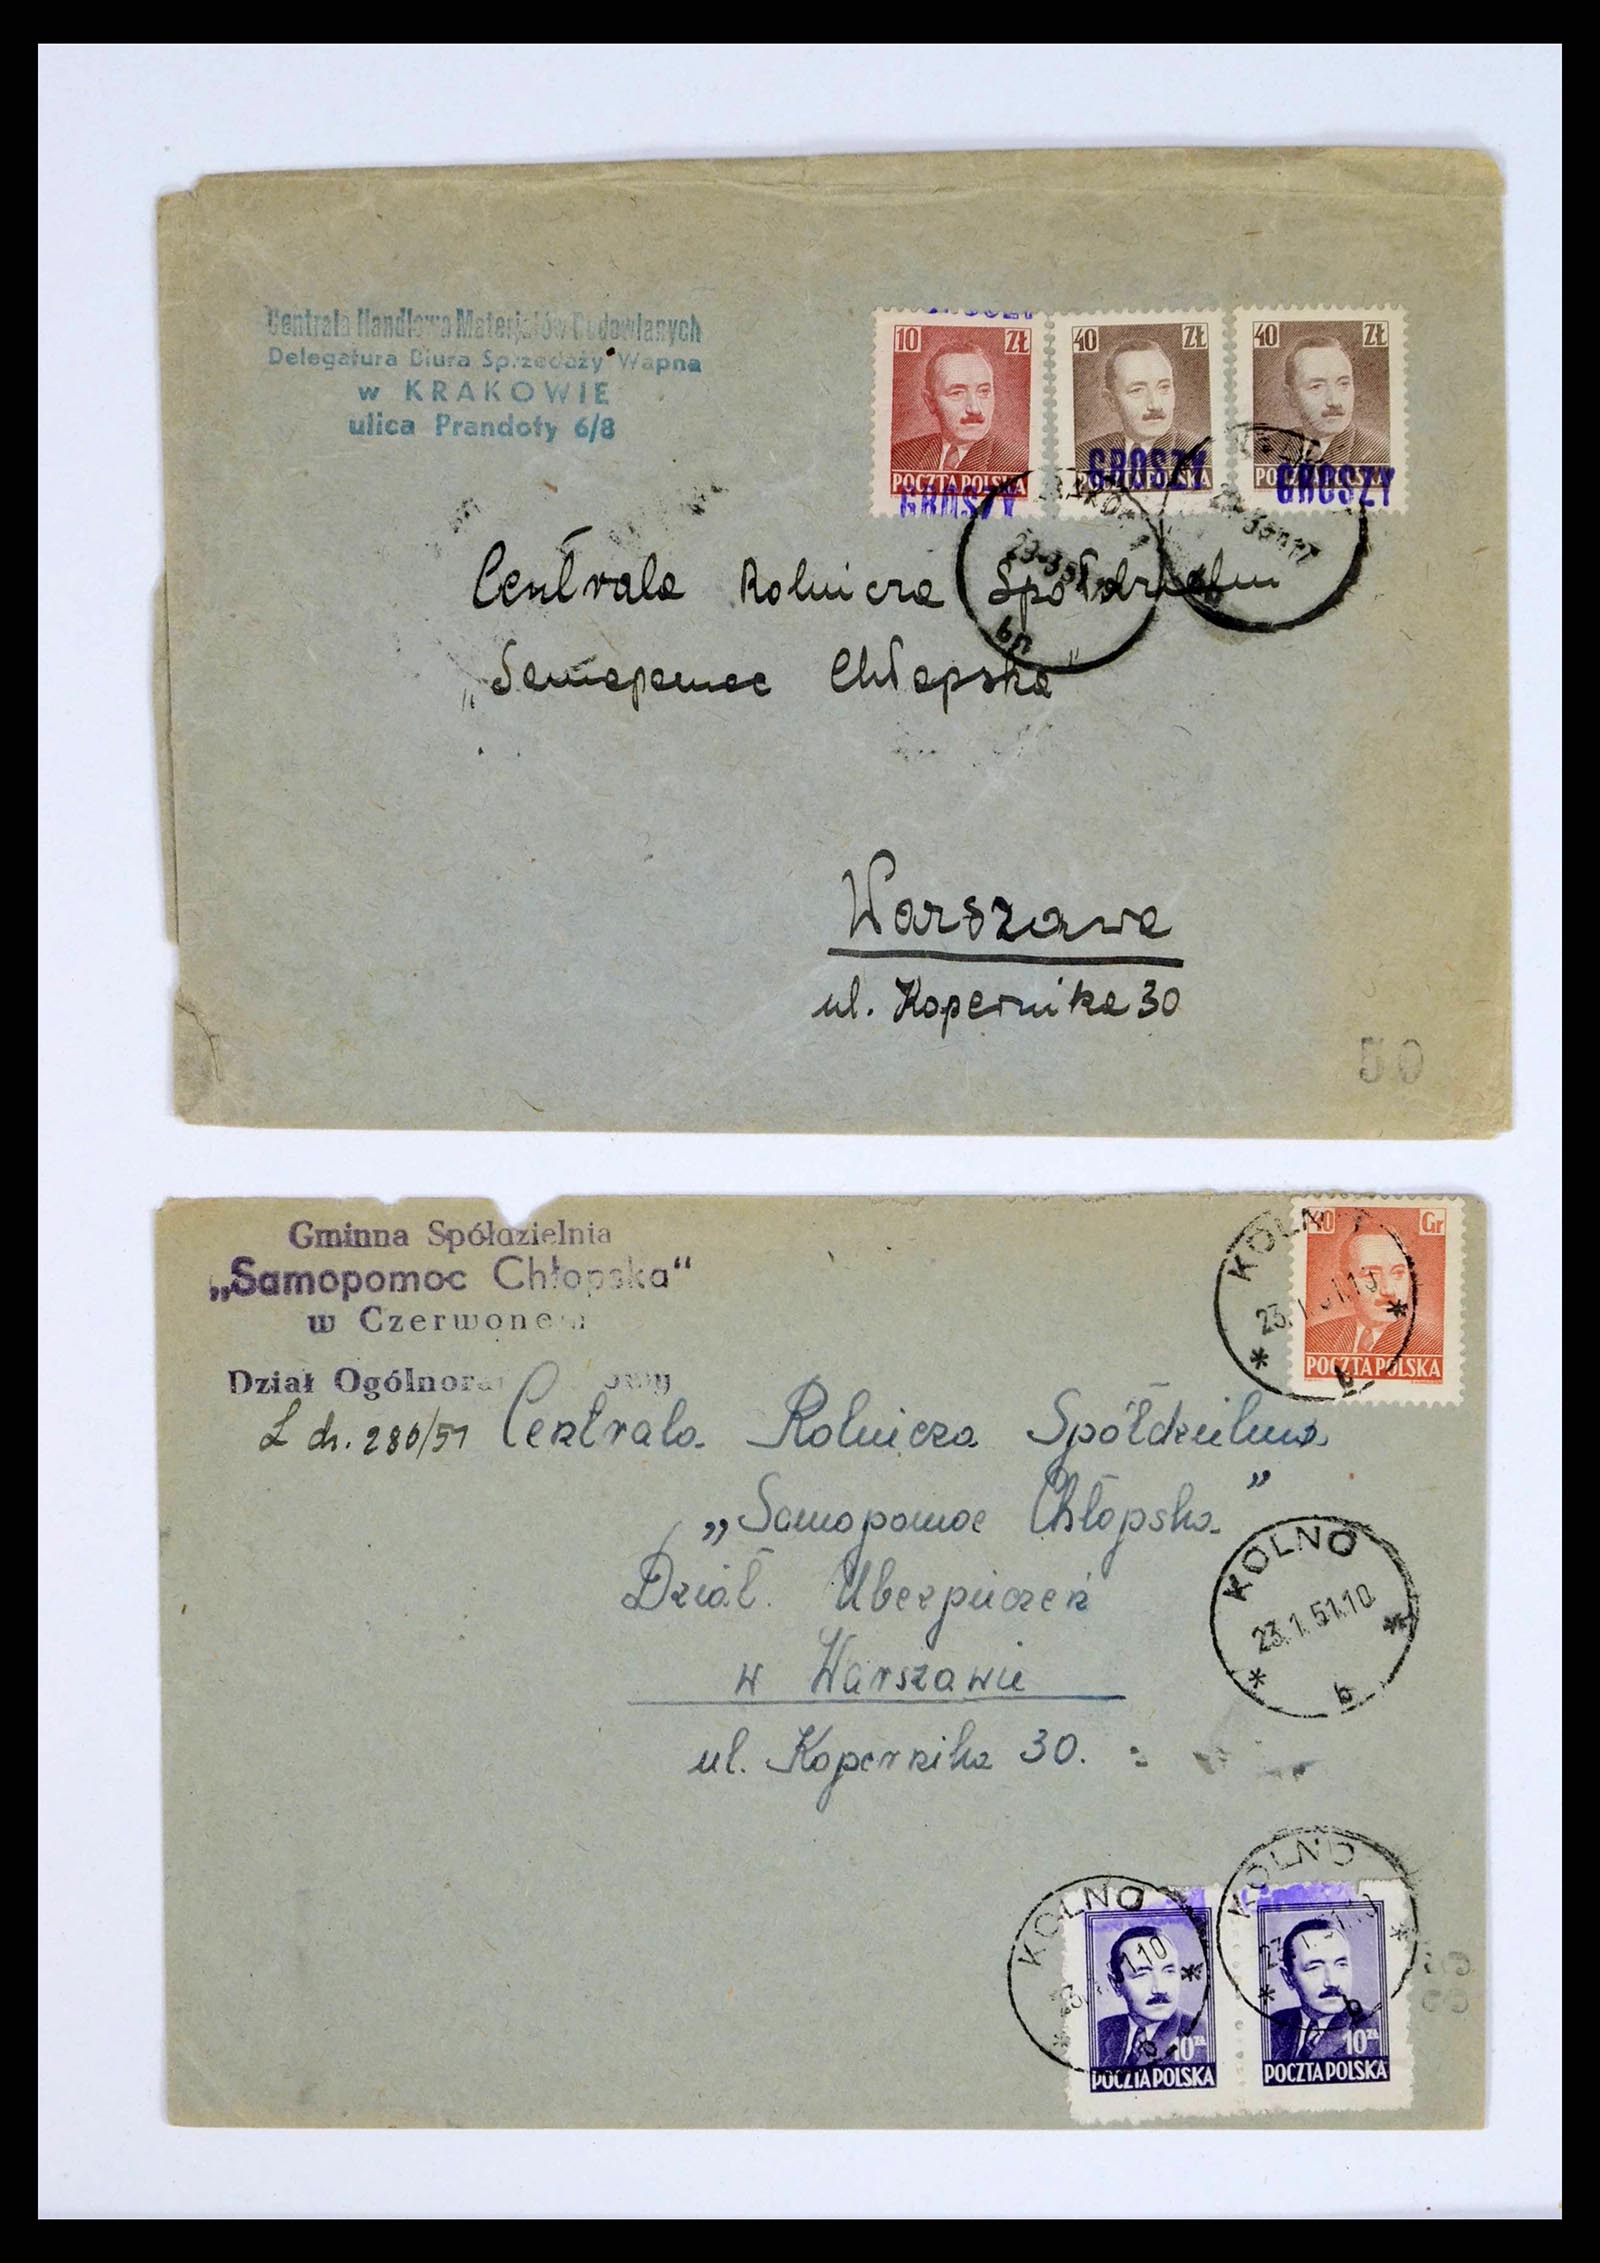 38201 0019 - Stamp collection 38201 Groszy overprints on cover 1950-1951.